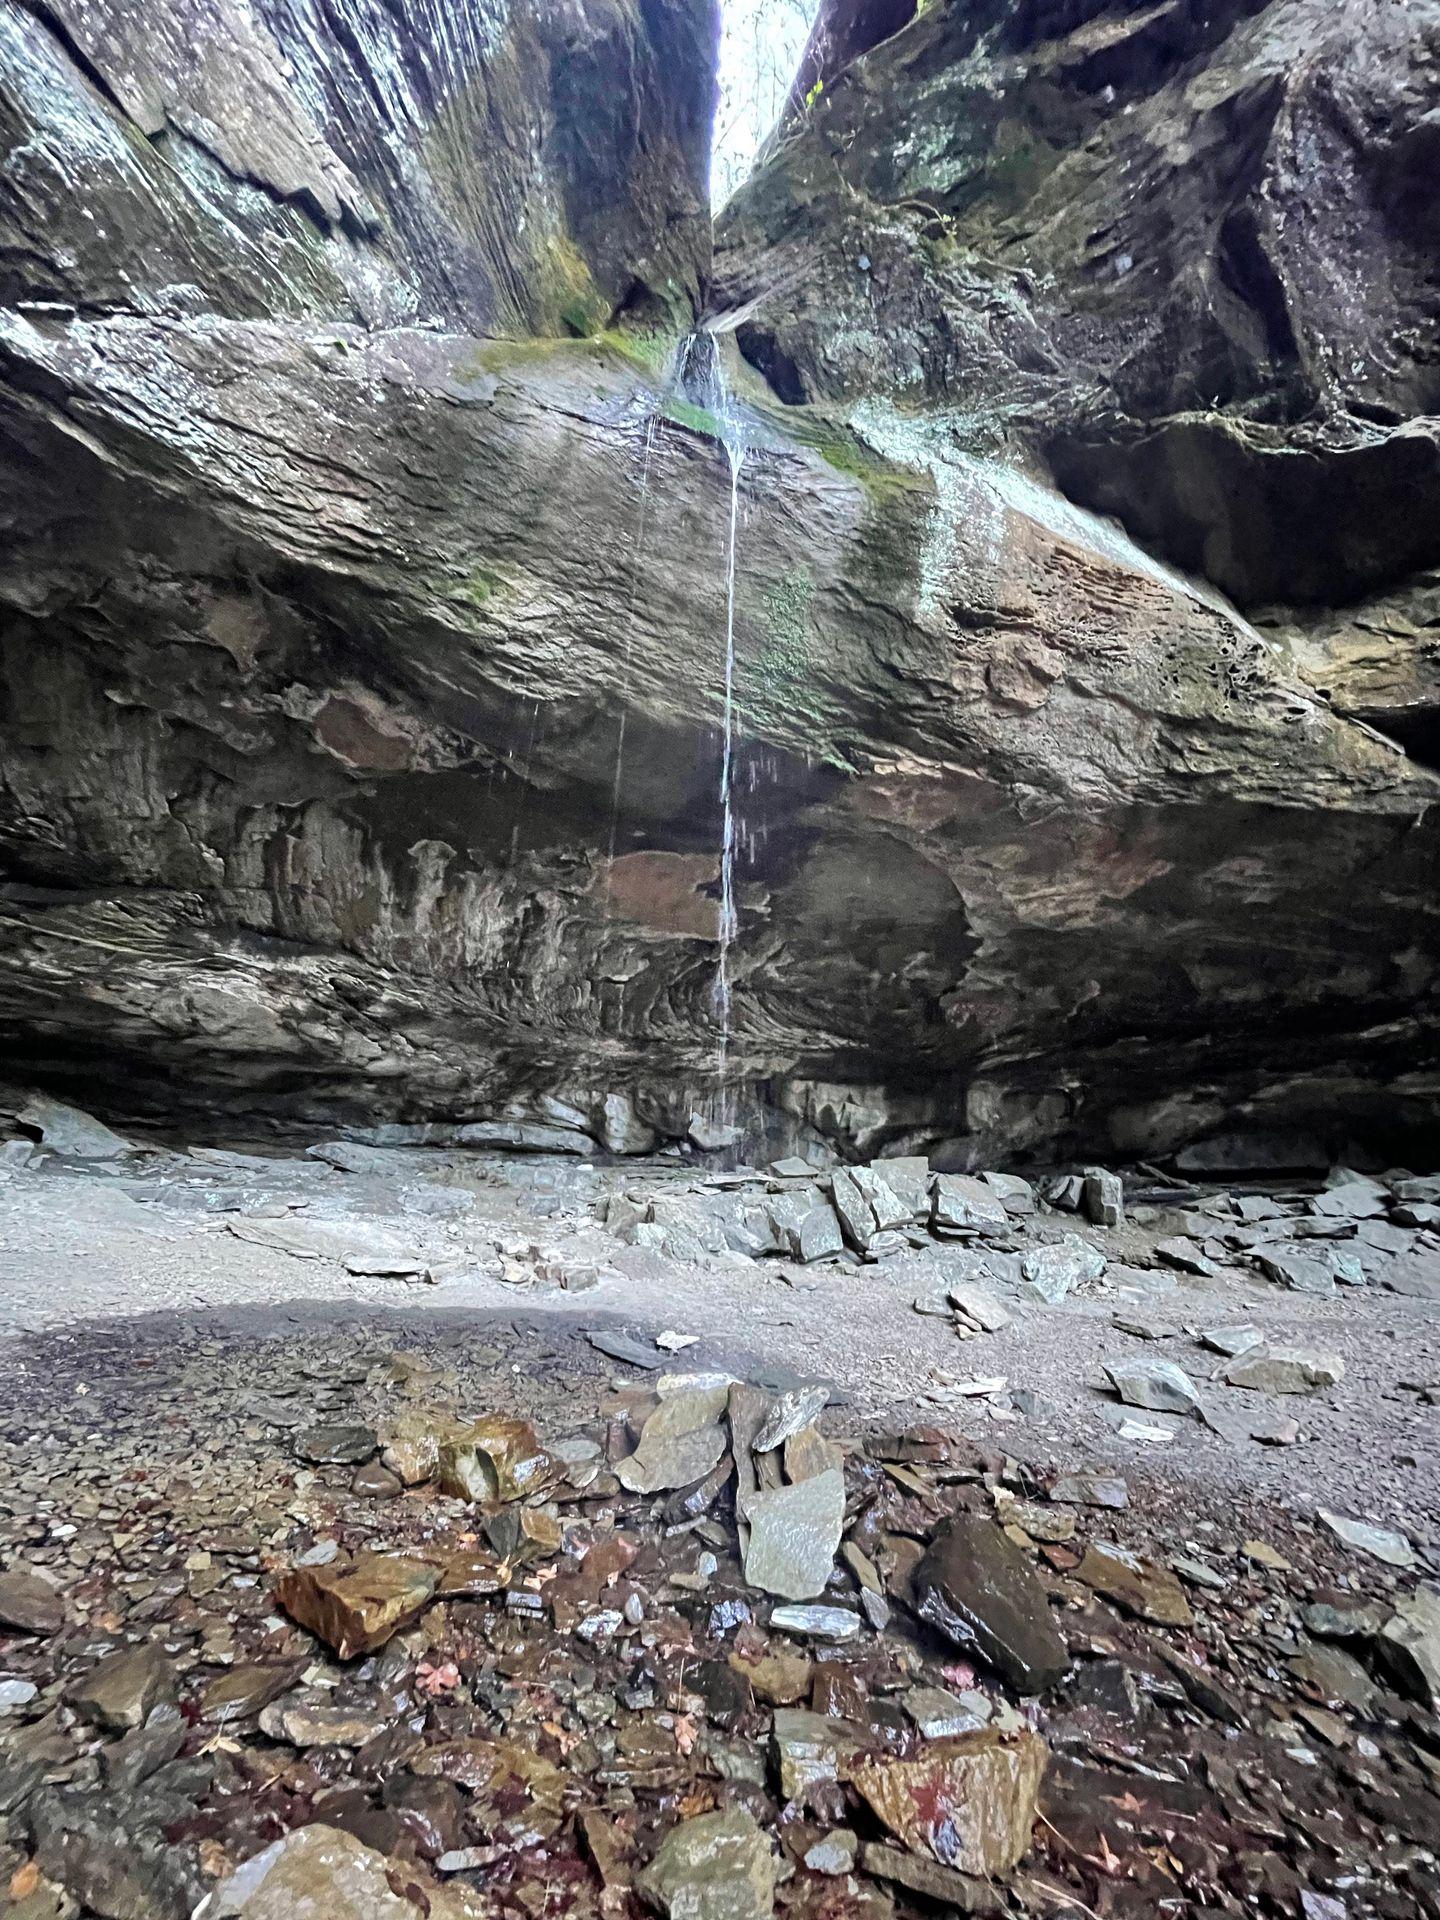 A view of Pam's Grotto with a small pool of water in front.